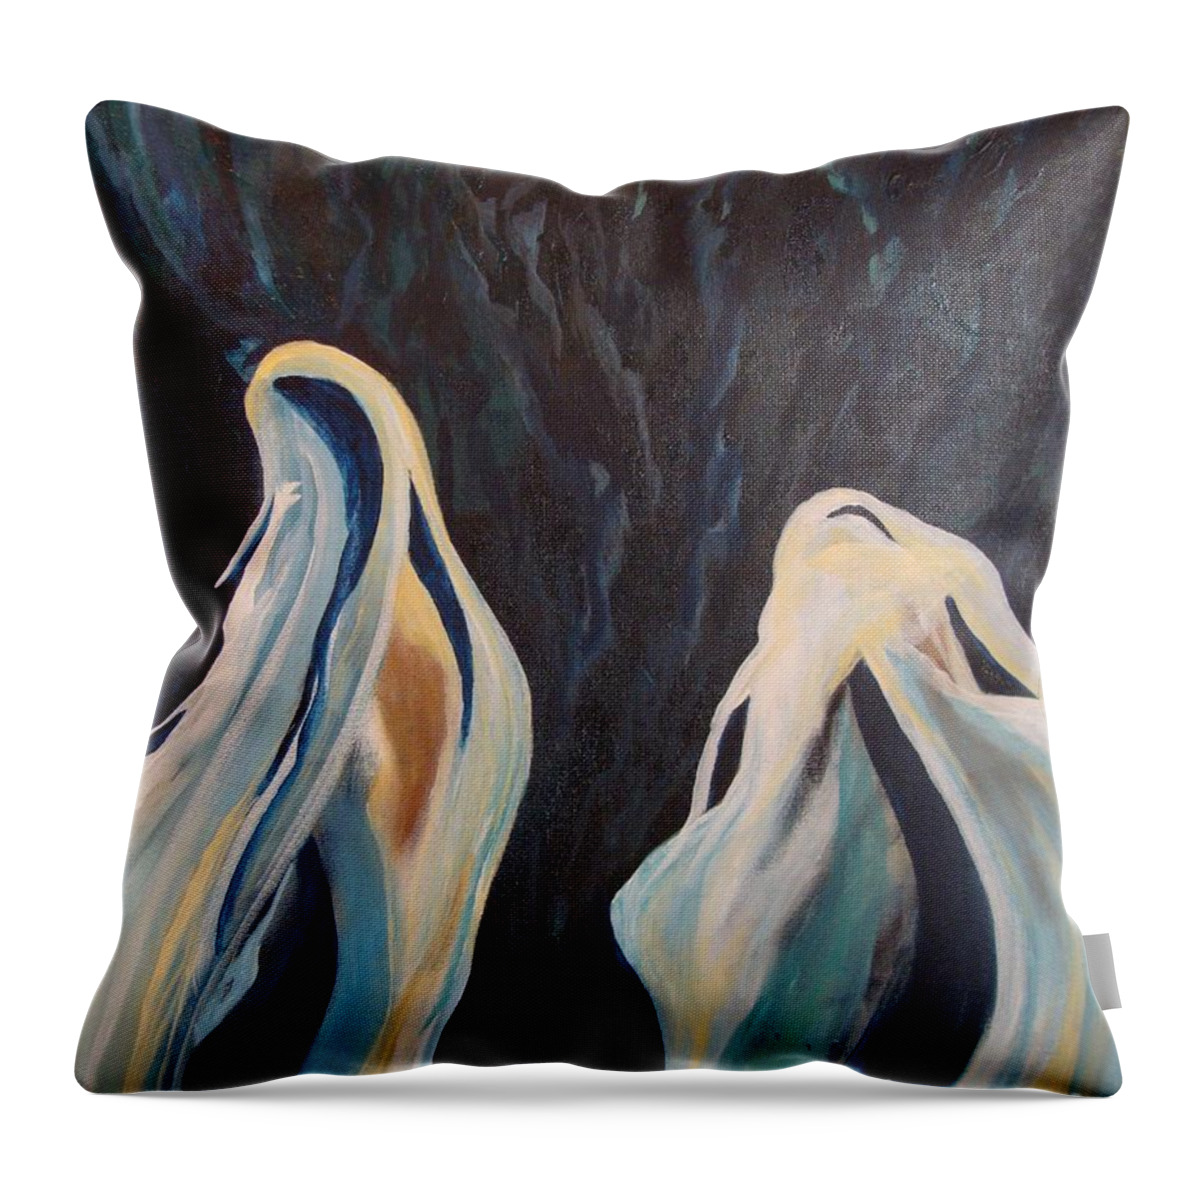 Abstract Throw Pillow featuring the painting Fugue by Stuart Engel